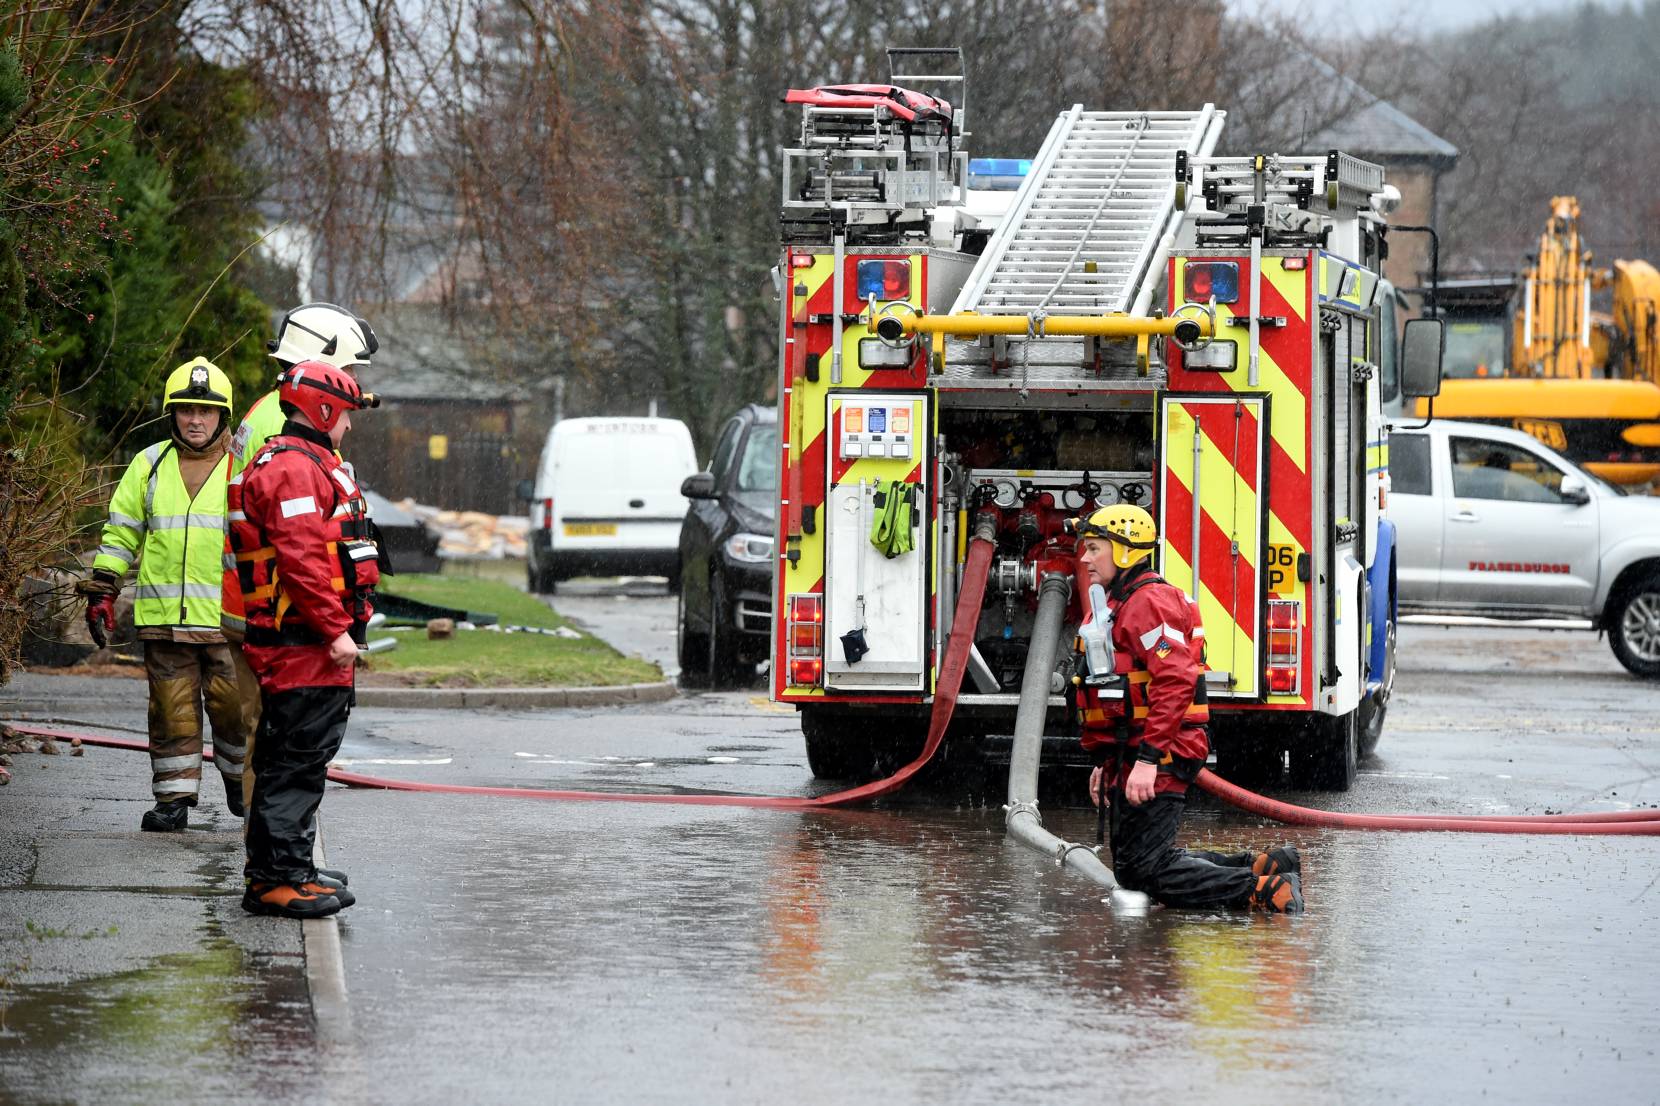 Flooding in Ballater. Fire fighters try to unblock the drains at the caravan park.